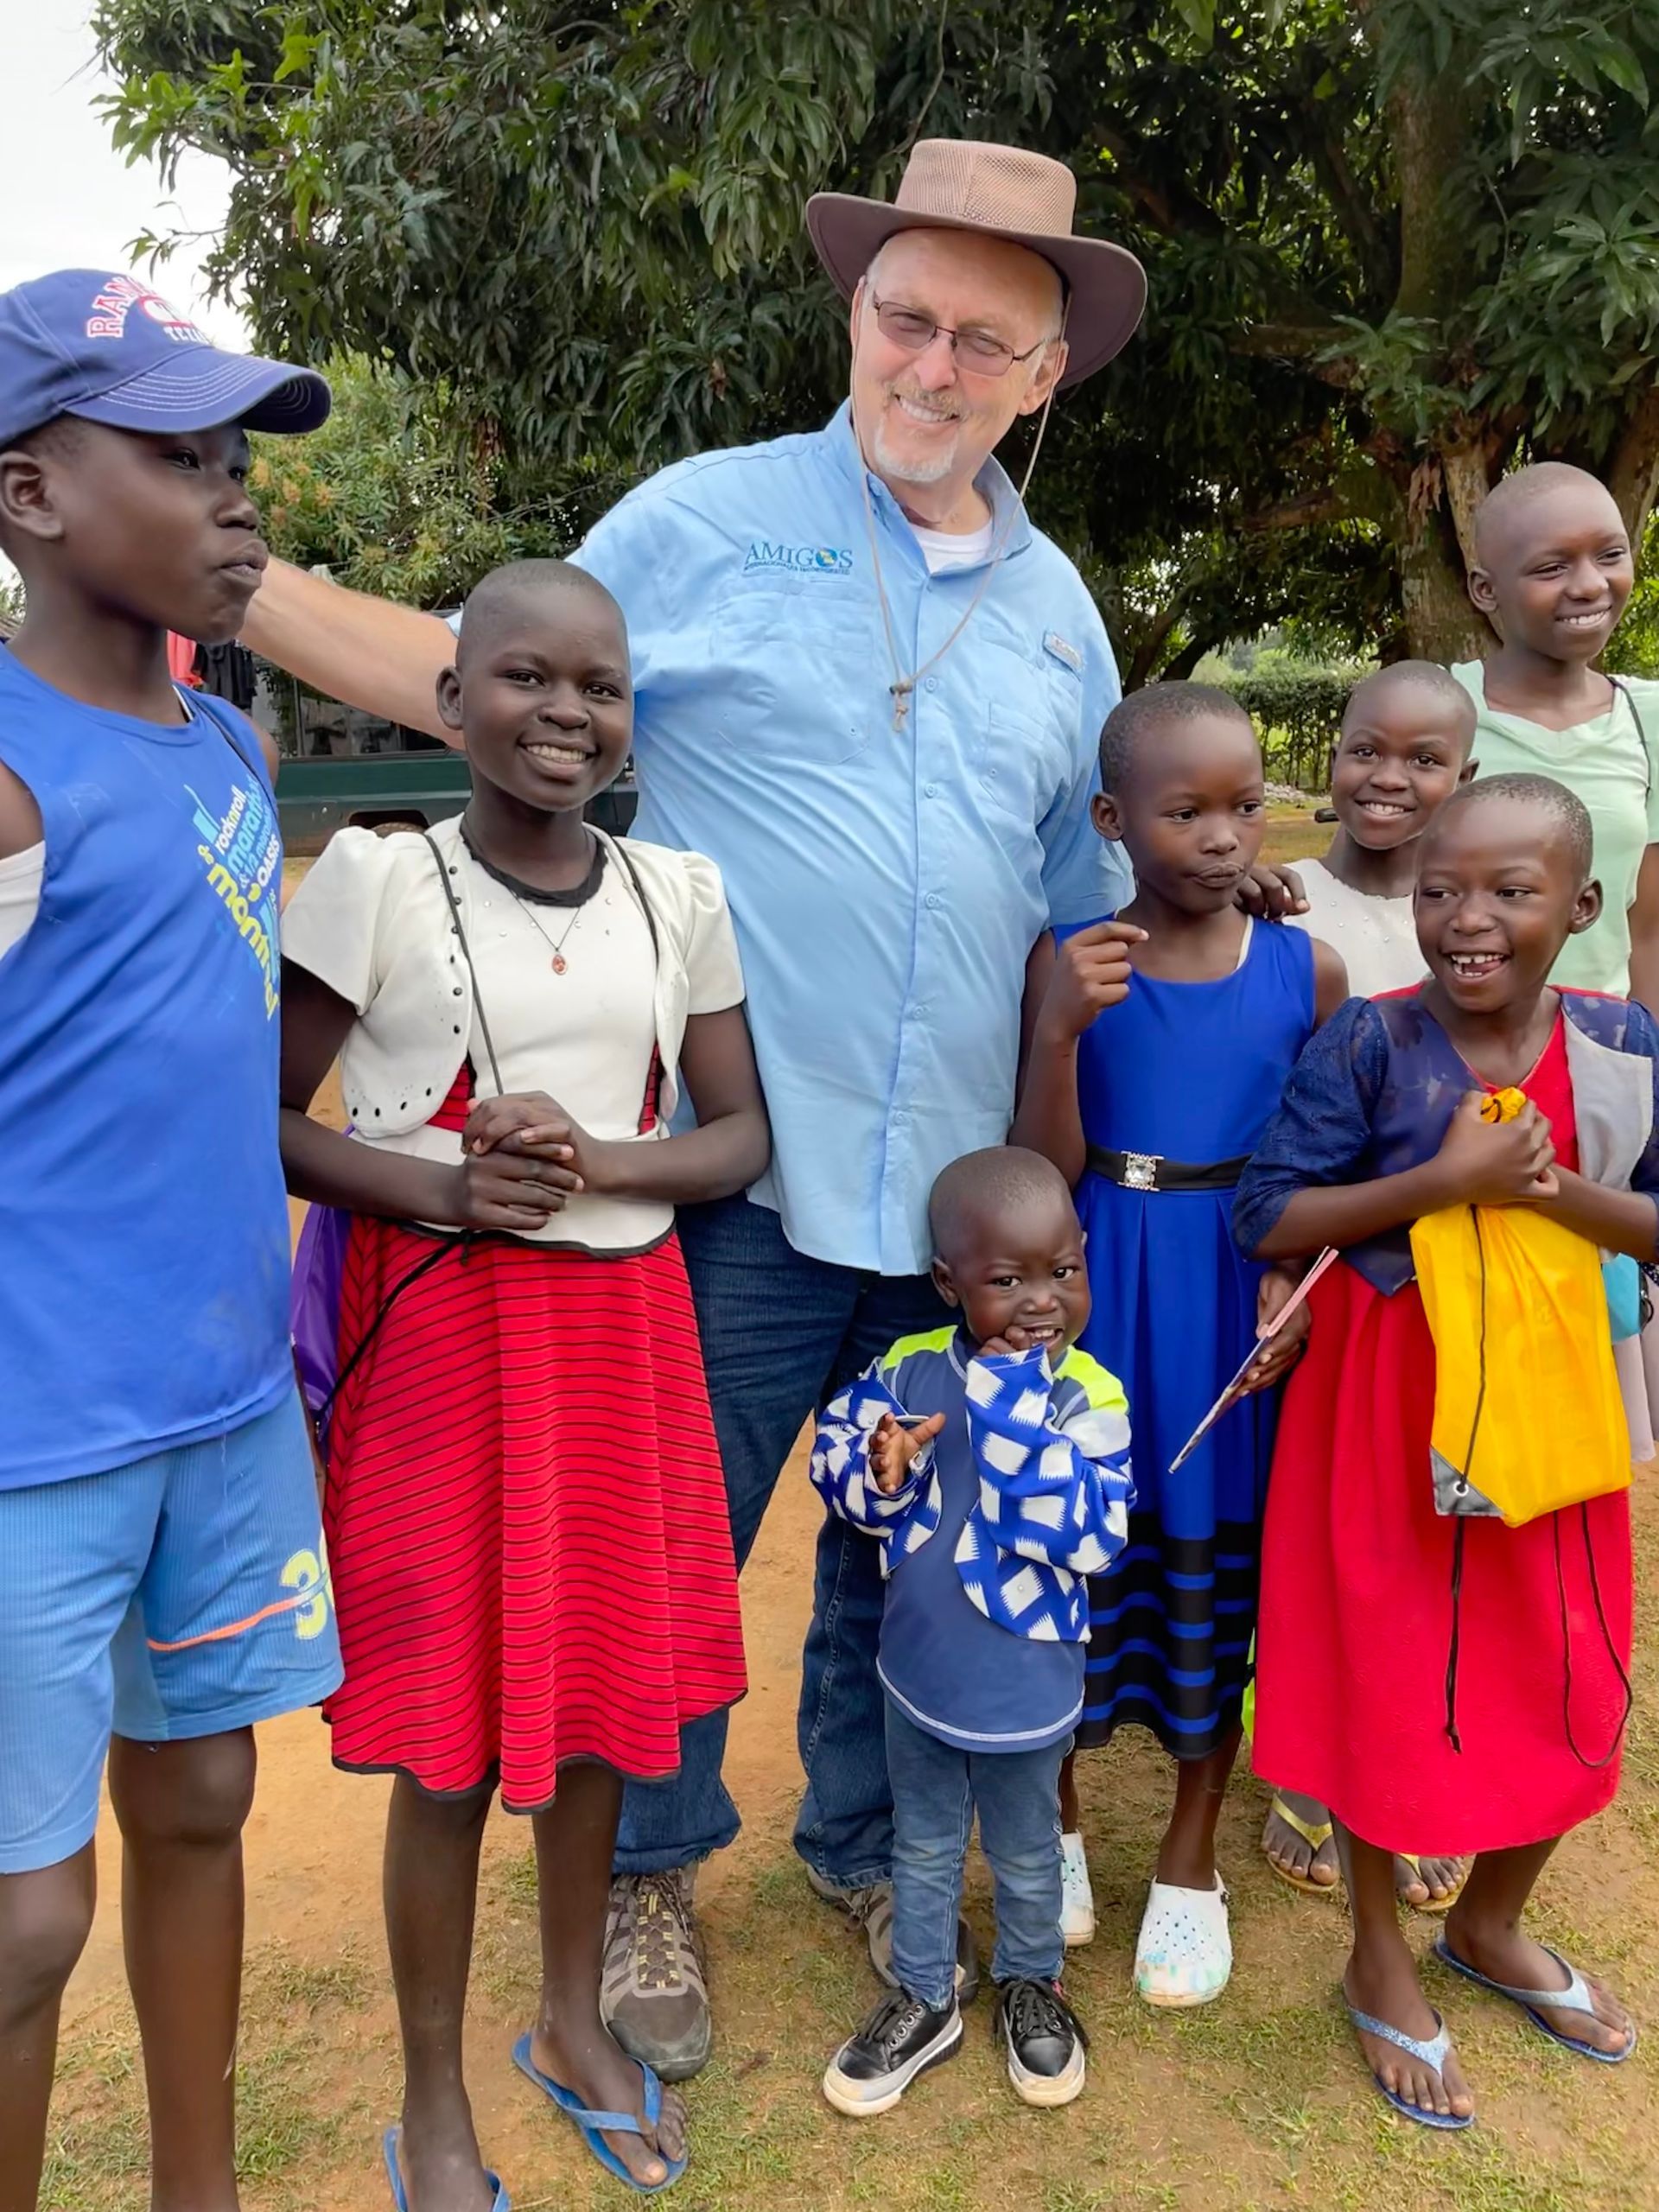 Michael Ryer working with orphans and sponsored children from Africa